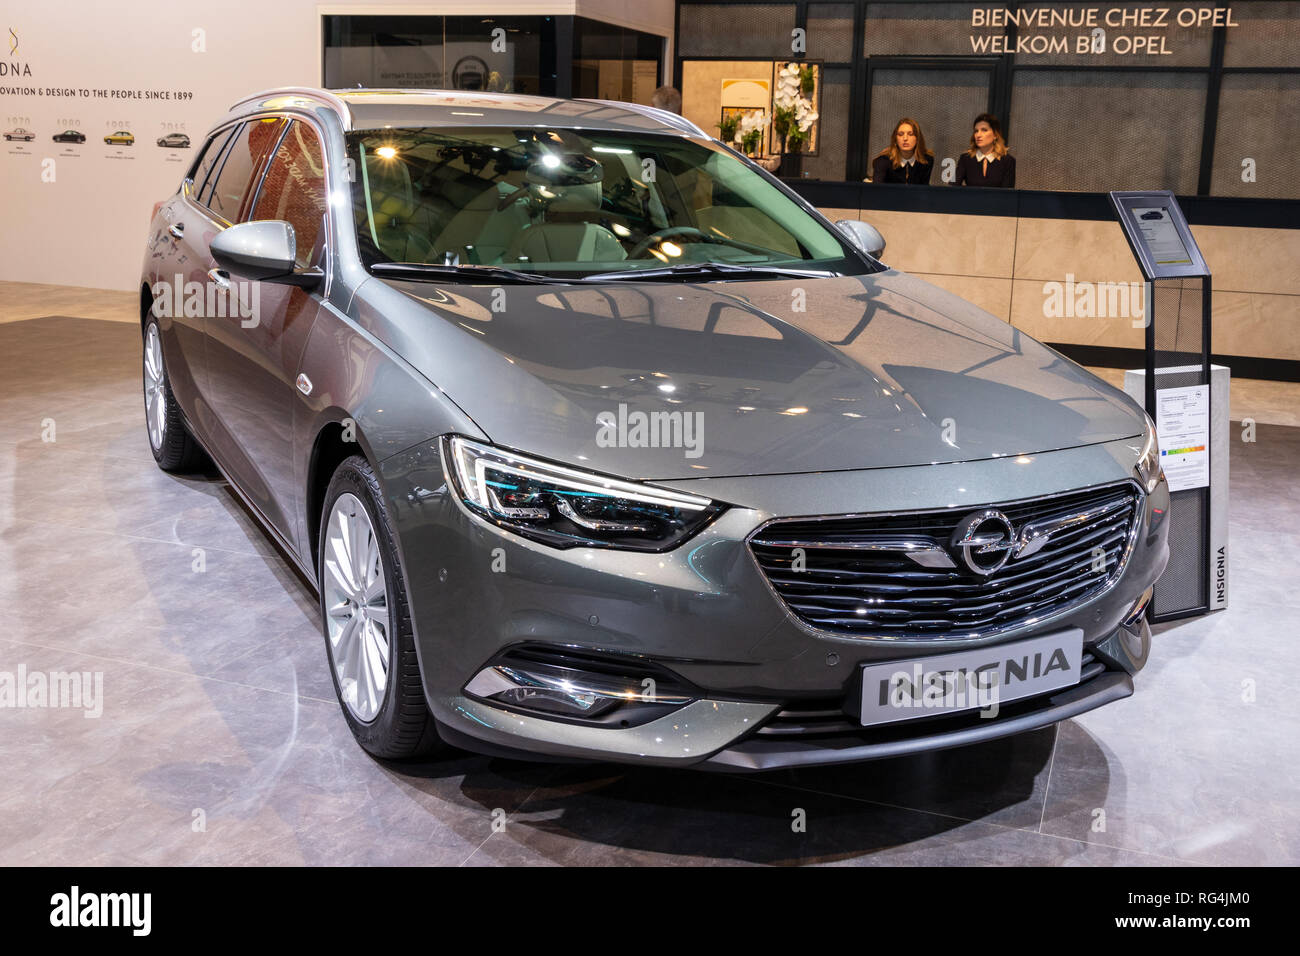 BRUSSELS - JAN 18, 2019: Opel Insignia car showcased at the 97th Brussels Motor Show 2019 Autosalon. Stock Photo